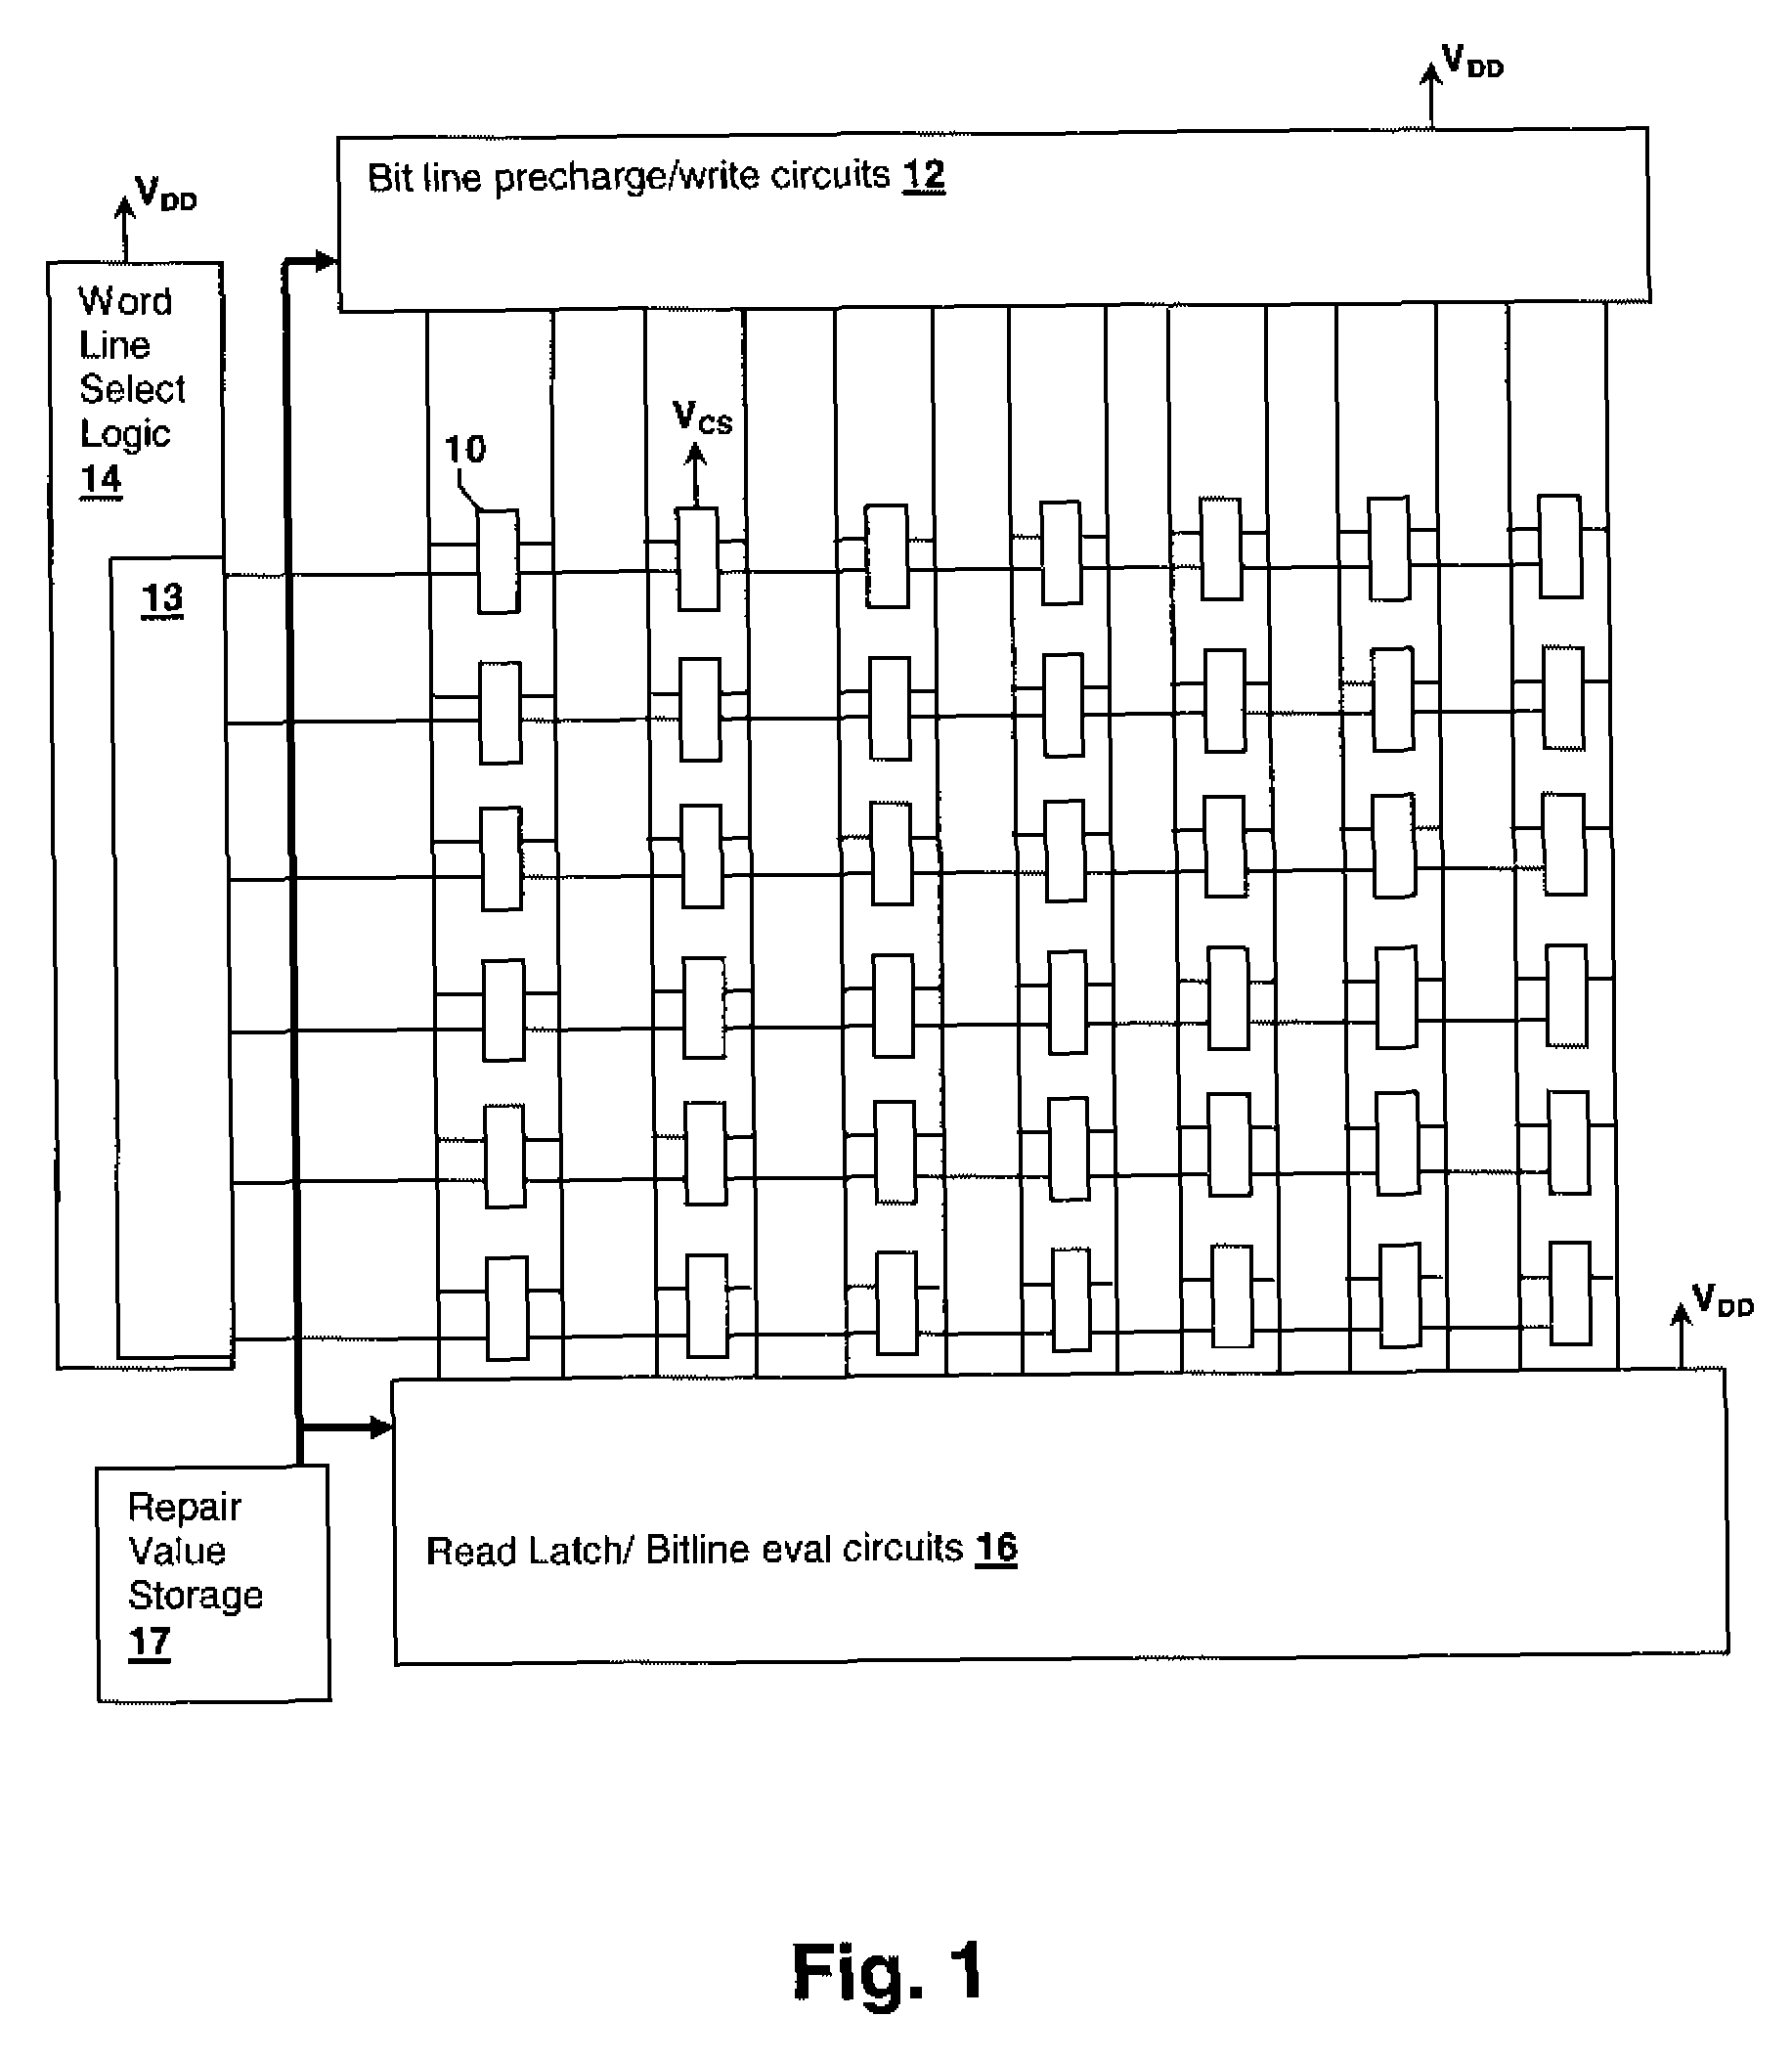 Method and computer program for selecting circuit repairs using redundant elements with consideration of aging effects